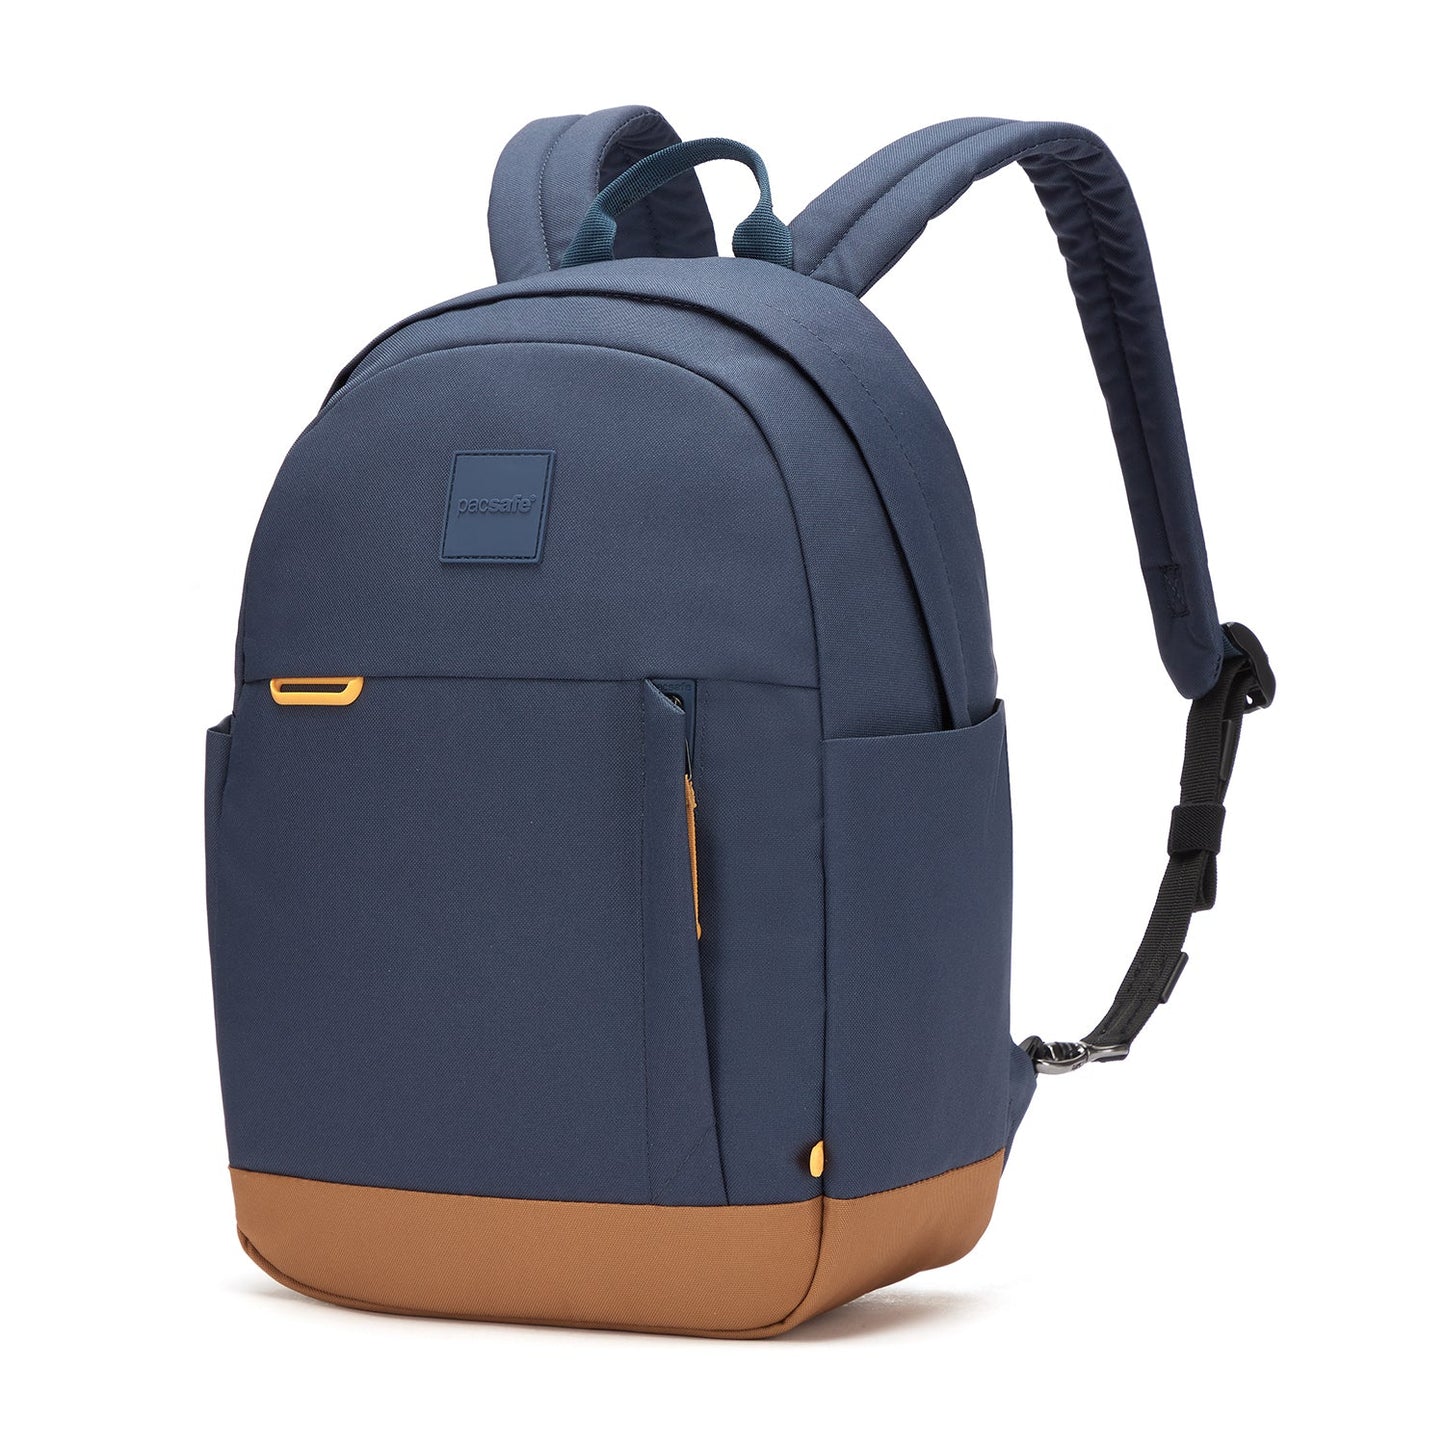 PacsafeGo 15L Anti-Theft Backpack